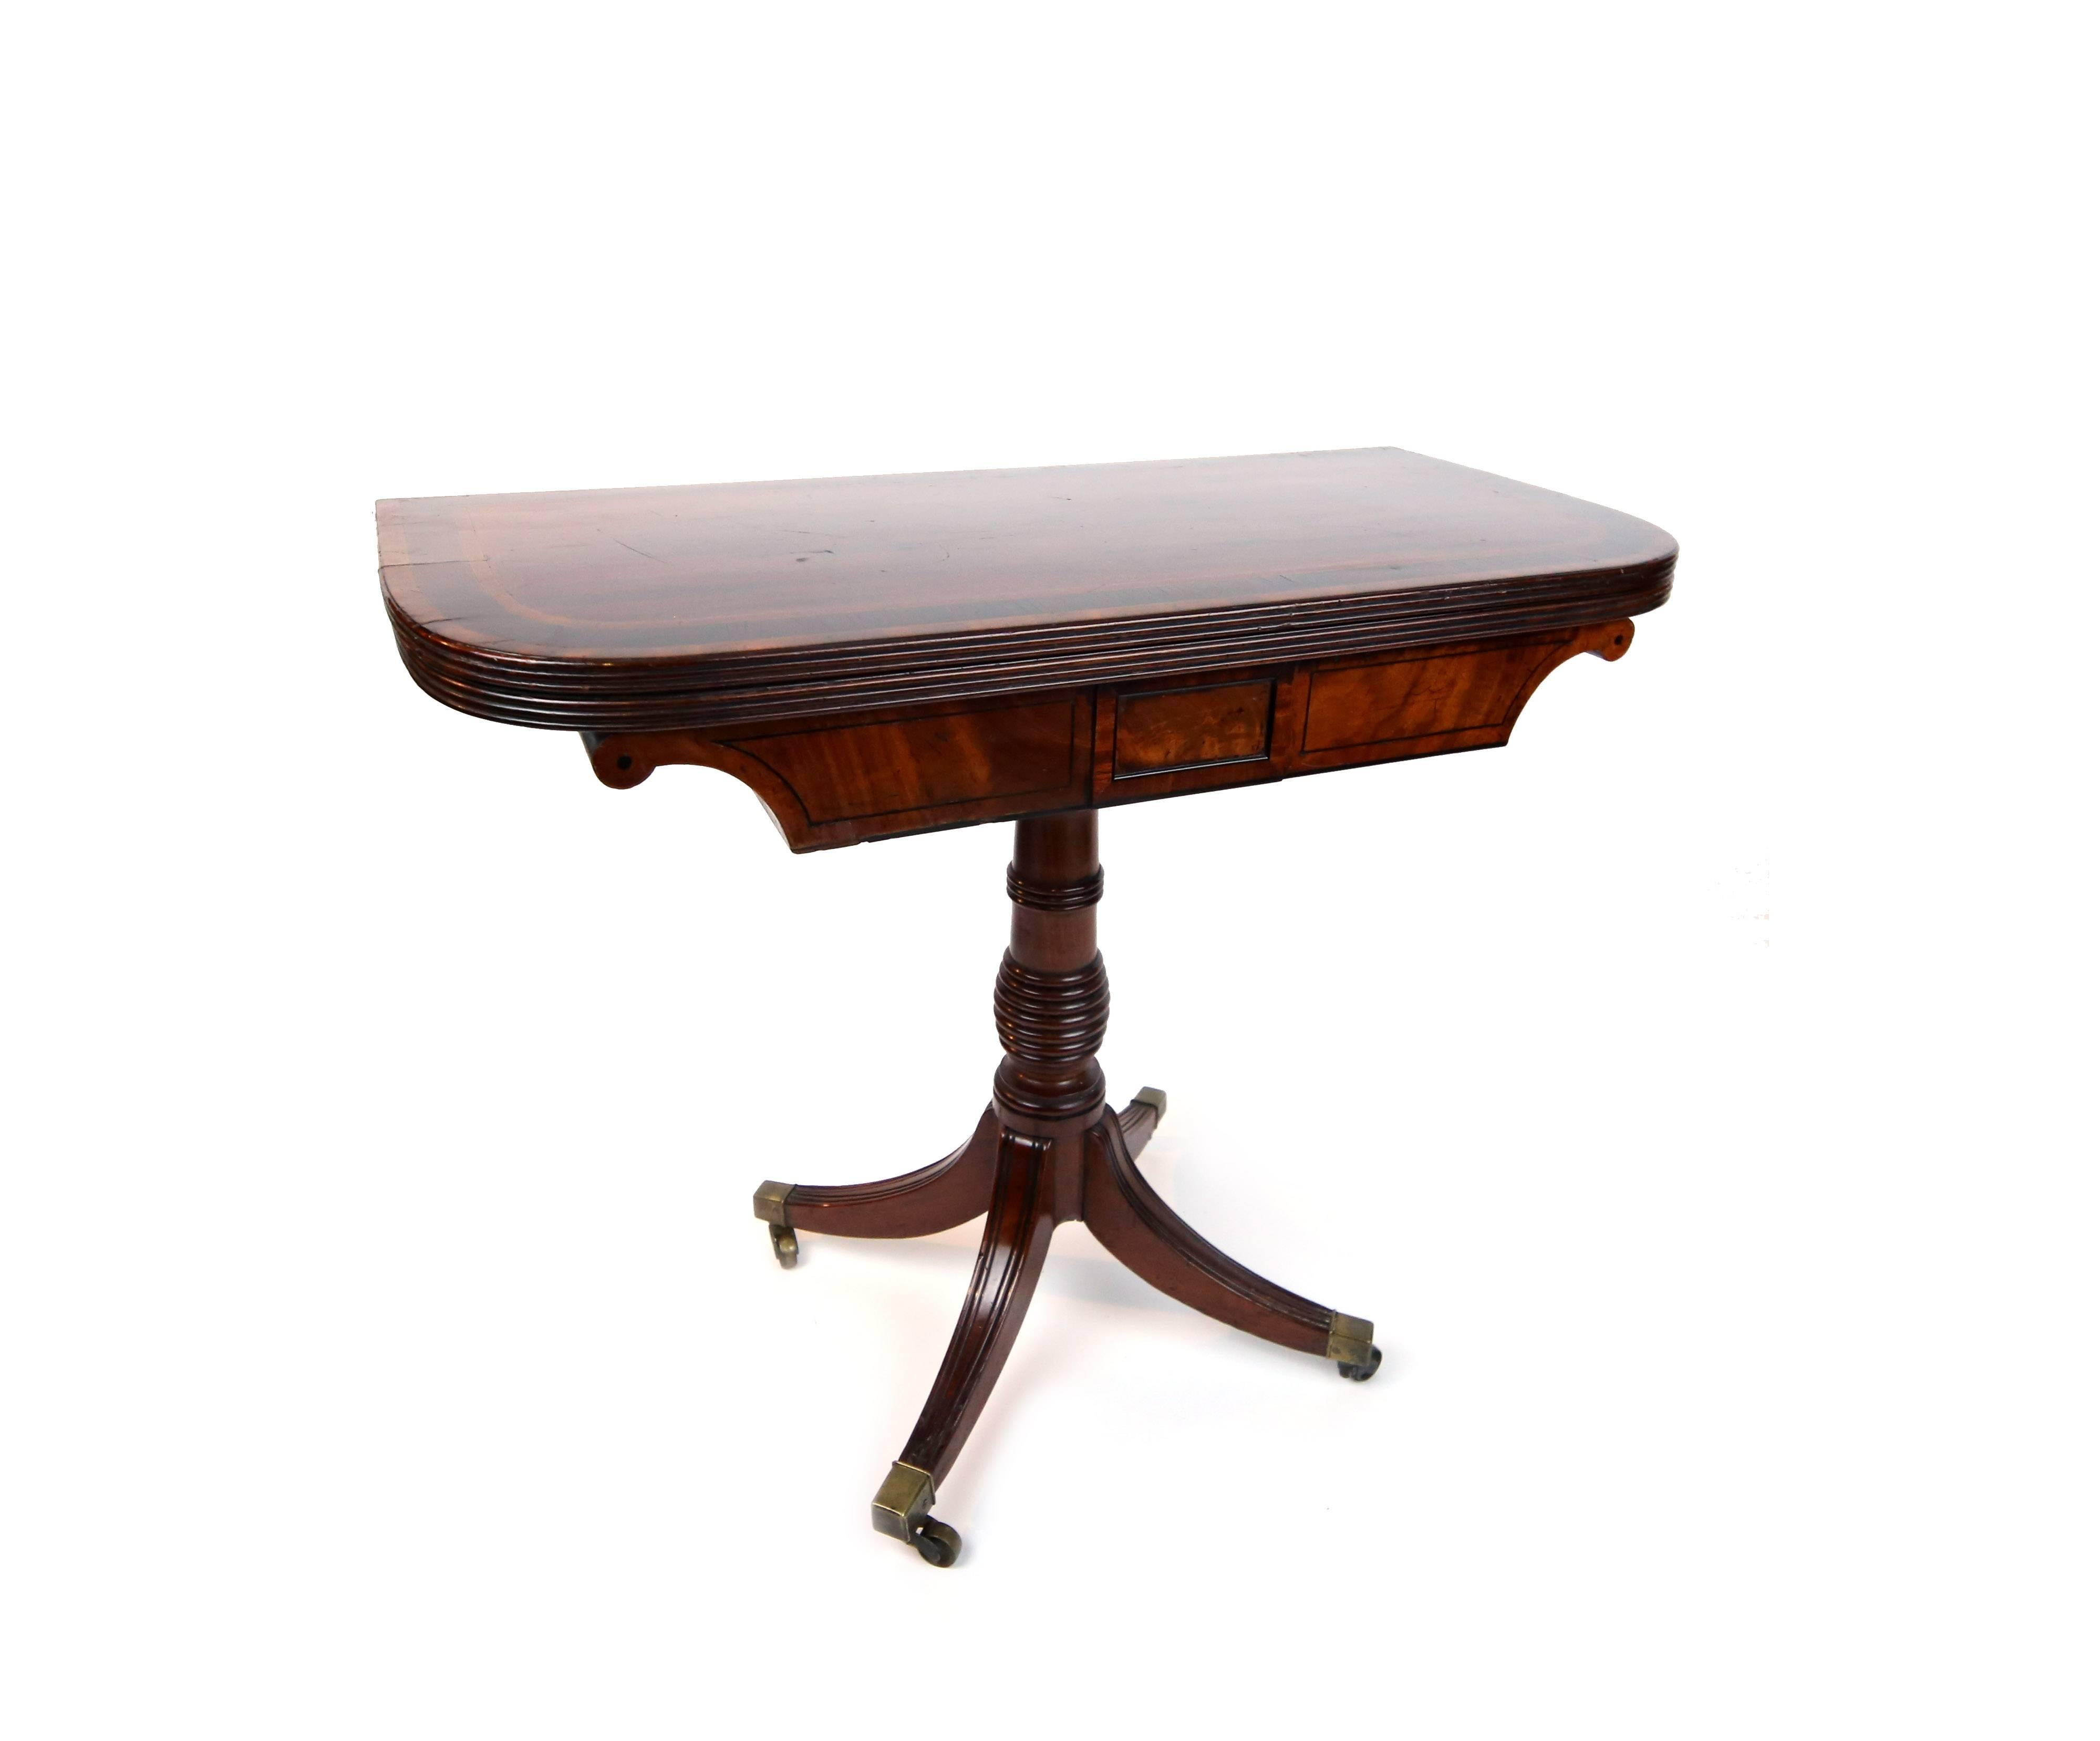 Fine flip-top game table in mahogany, satinwood, and ebony stringing. Cockbeaded table edge opens to original green felt gaming surface. Simple beehive turned pedestal base supported by four saber molded legs terminating in square cap brass castors,